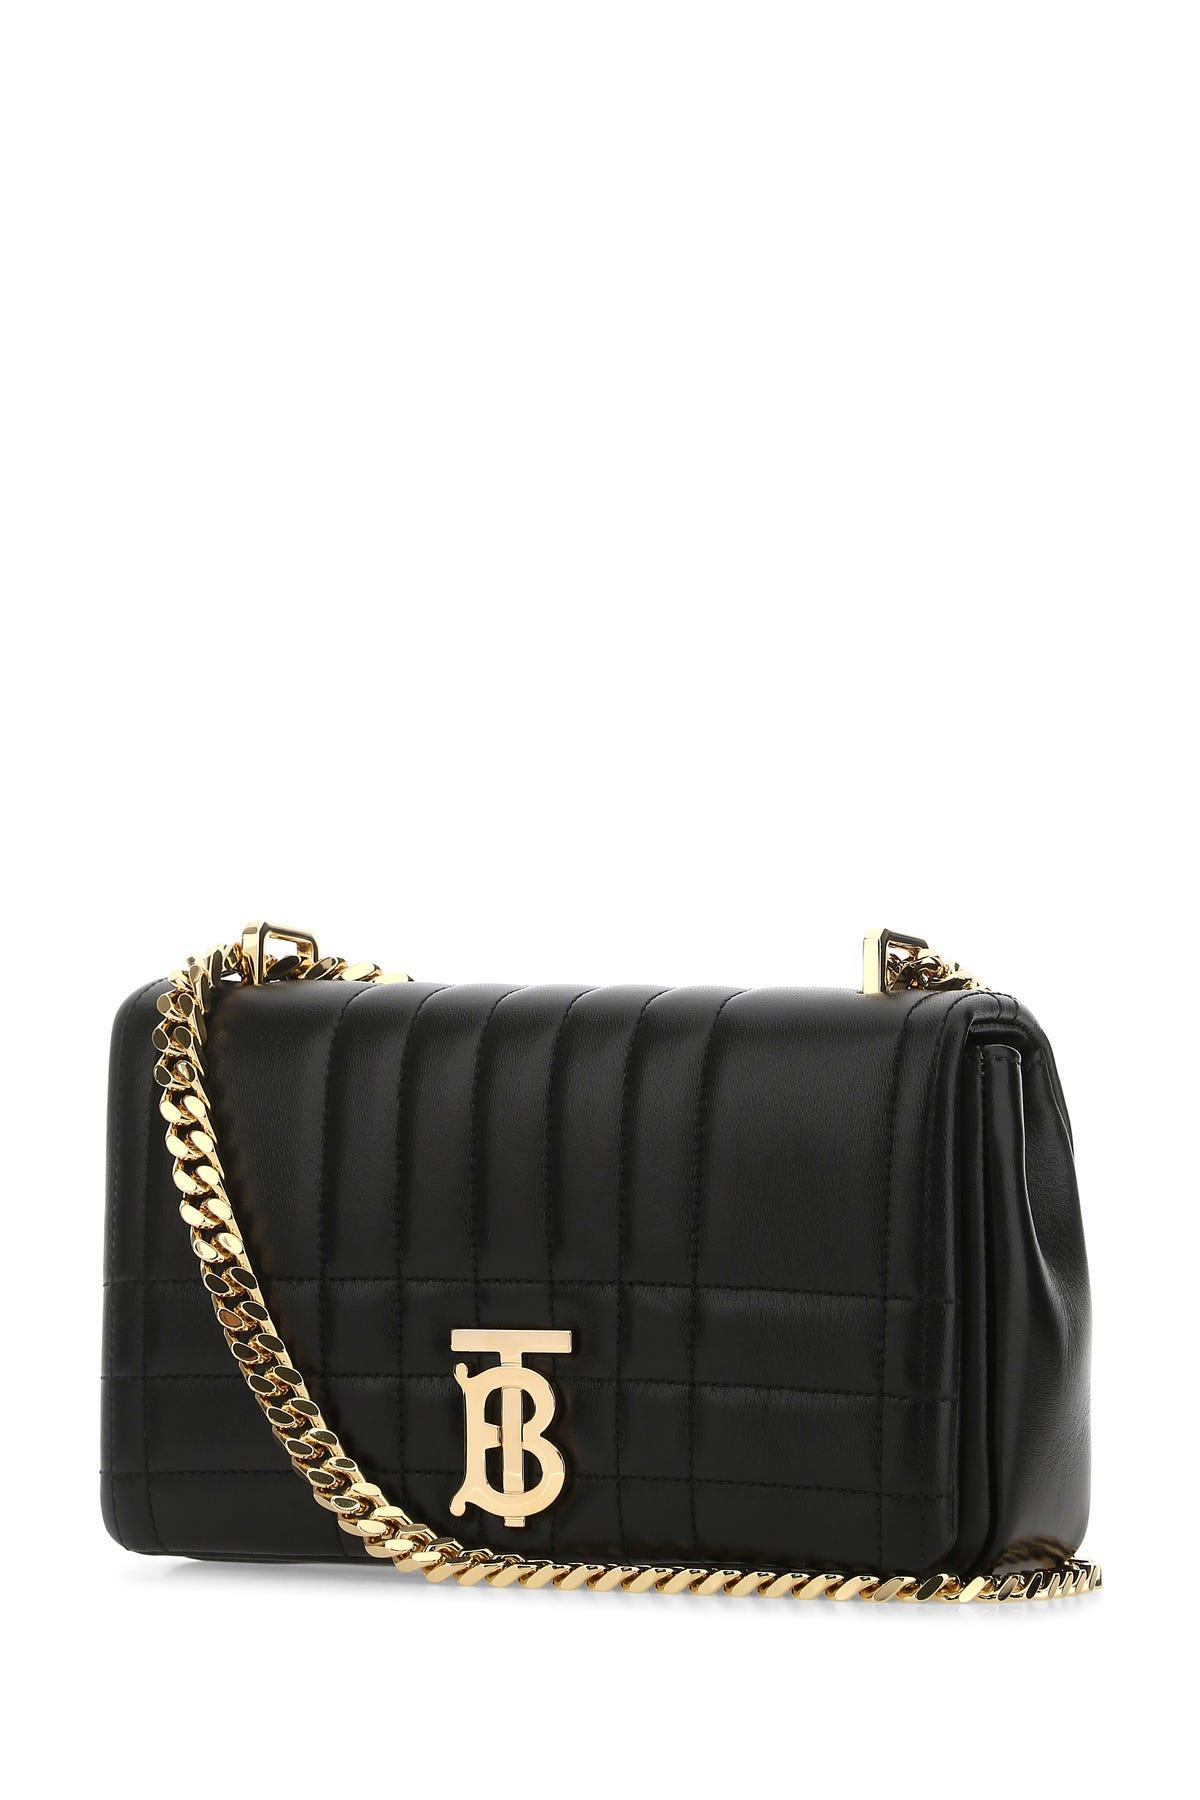 Burberry Lola Small Lambskin Quilted Crossbody Bag (Shoulder